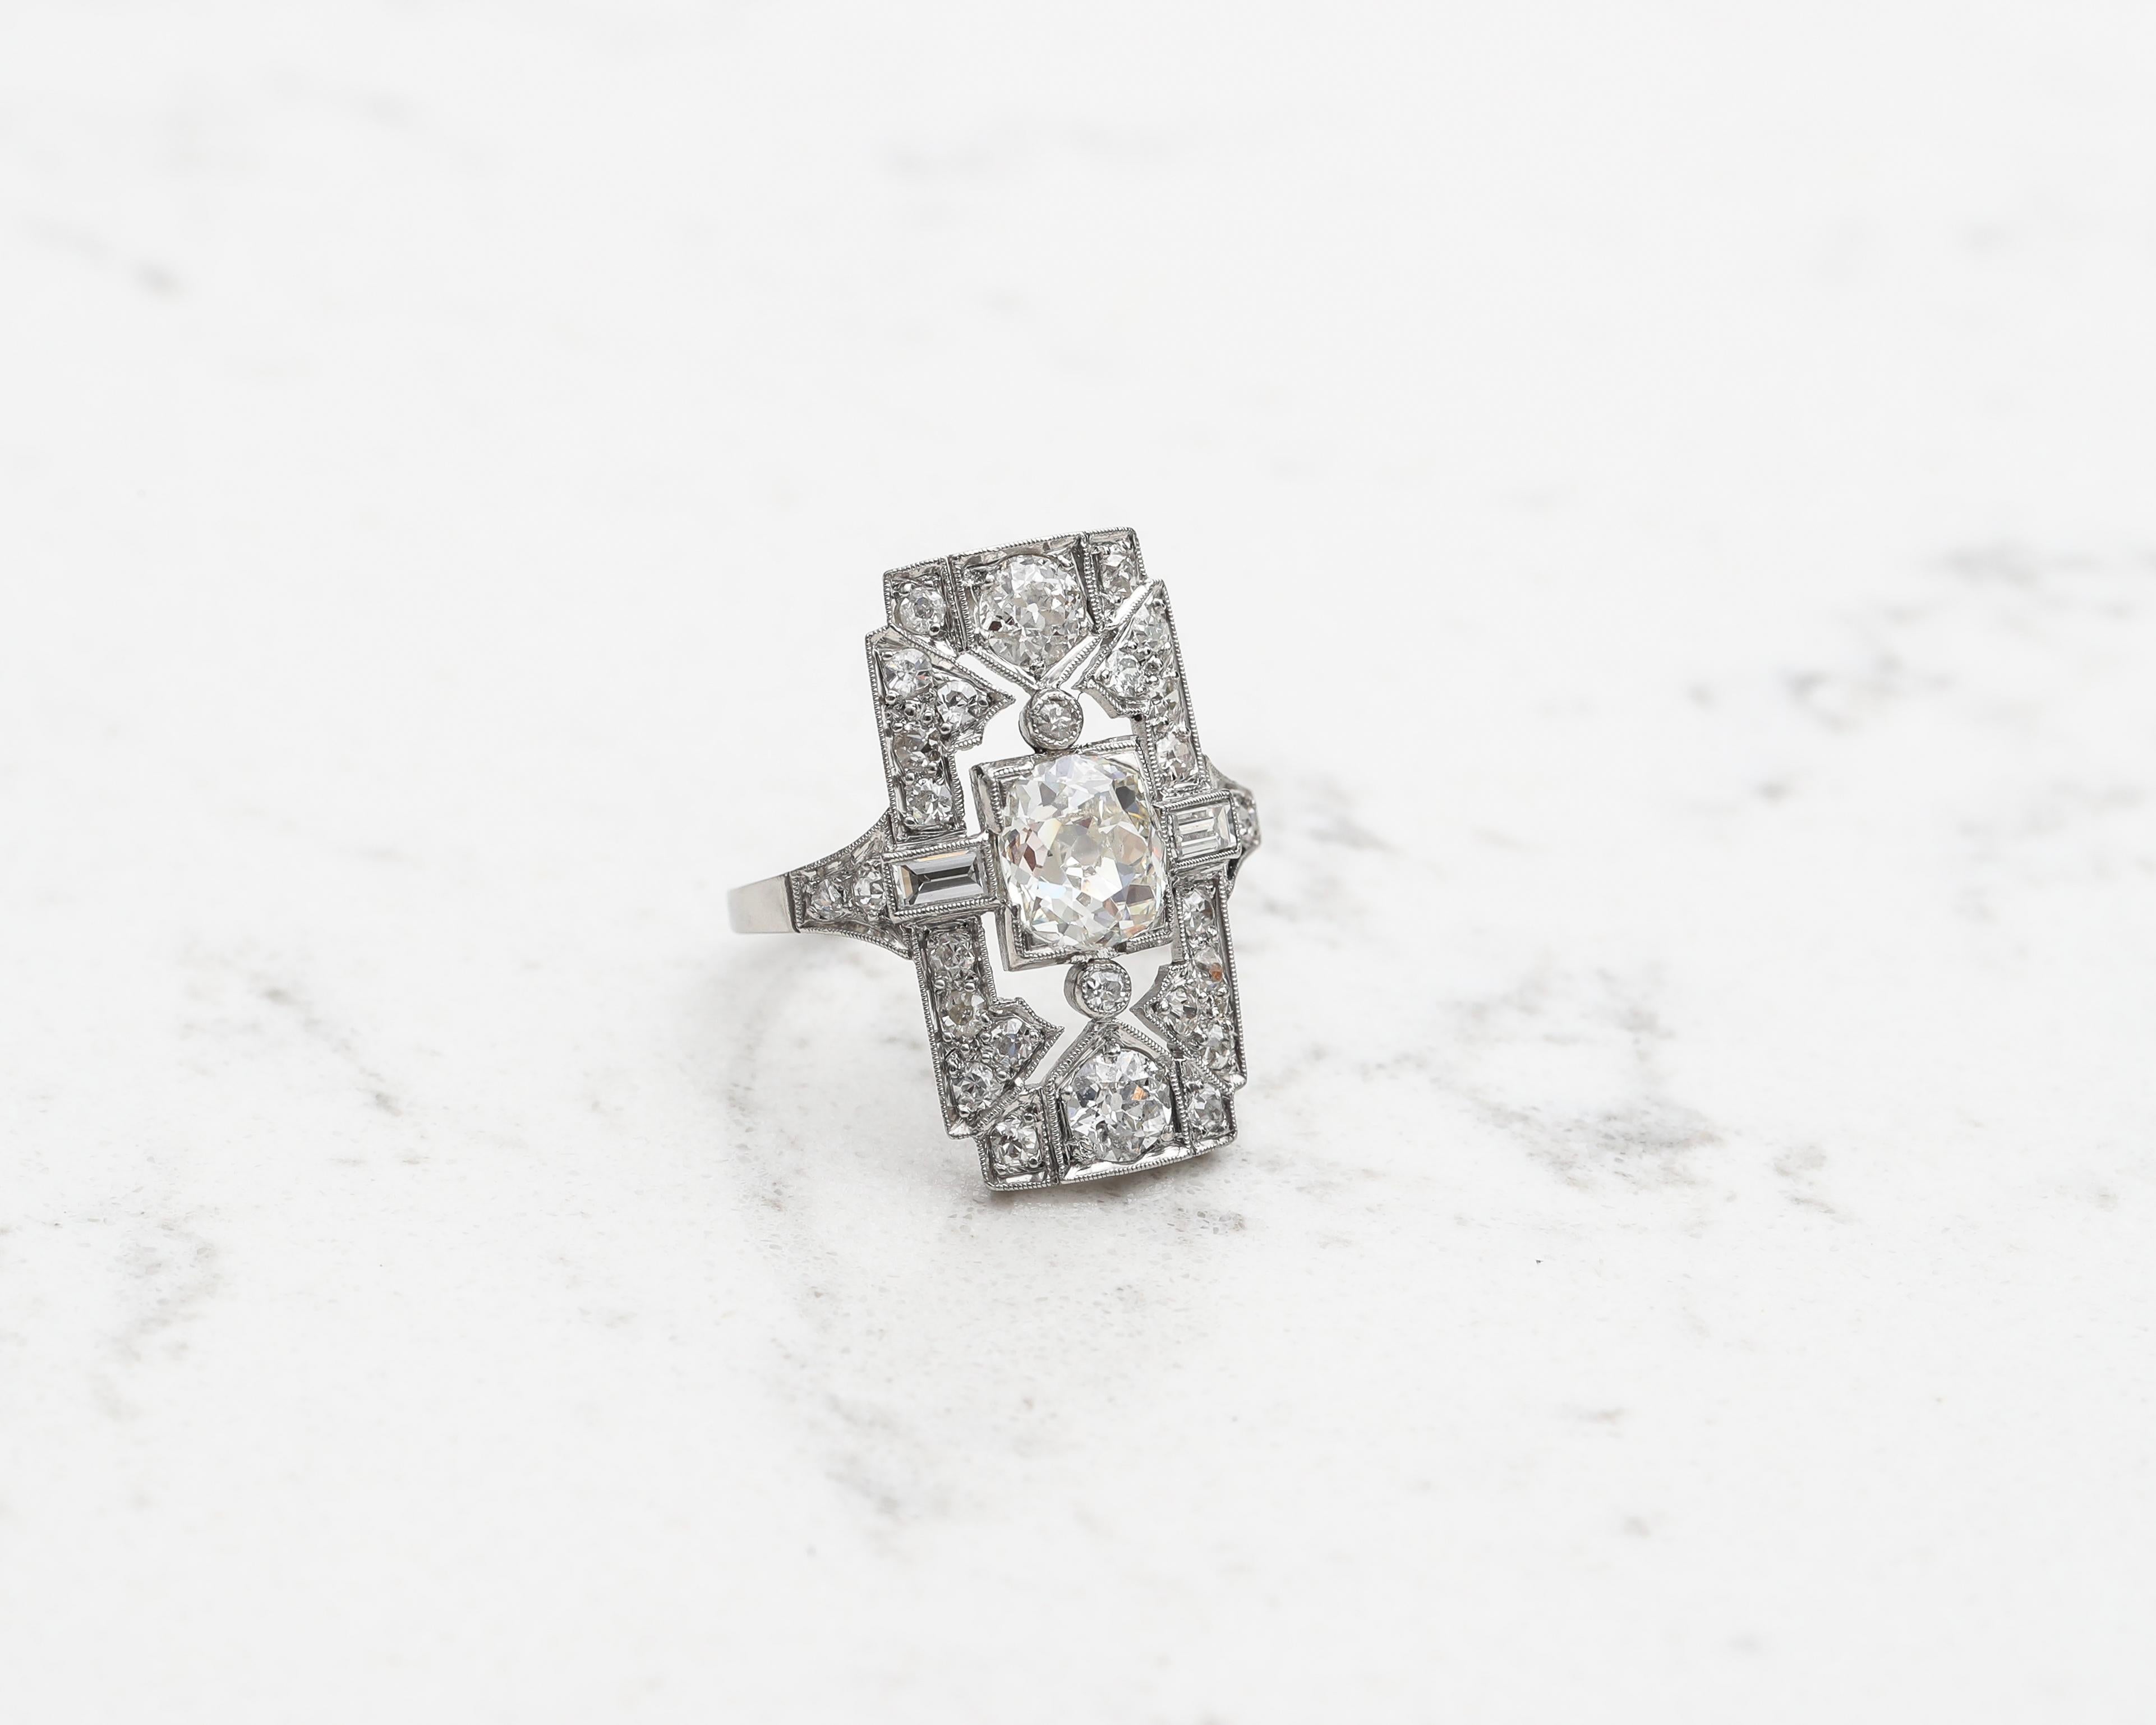 Art Deco Era 1920s Engagement Shield Ring featuring 2.40 carats of diamonds. 
Design is quite exquisite with intricate cut-out gallery and milgrain detailing around each part. Symmetrical design is seen throughout the piece. The diamonds sparkle